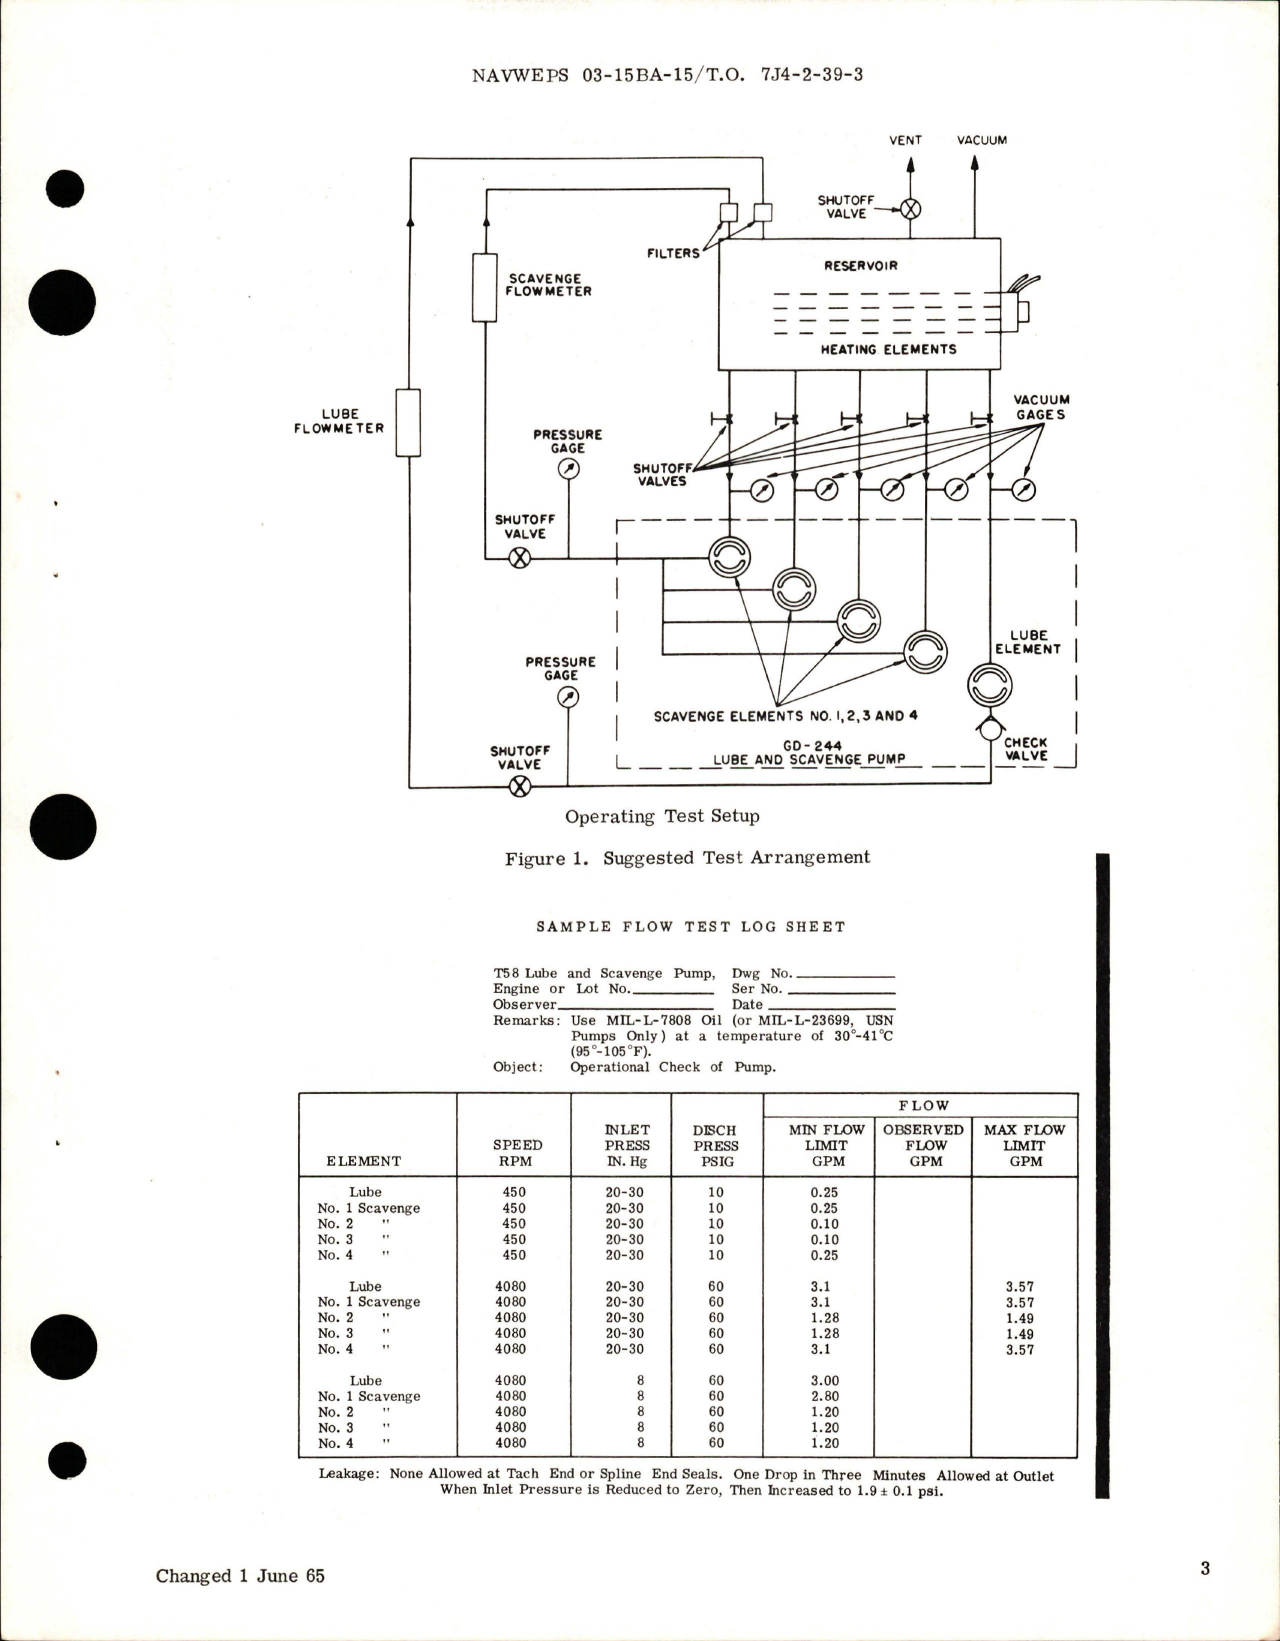 Sample page 5 from AirCorps Library document: Overhaul Instructions with Parts for Lube and Scavenge Pump - Part 4000T98P01 - GD-244 